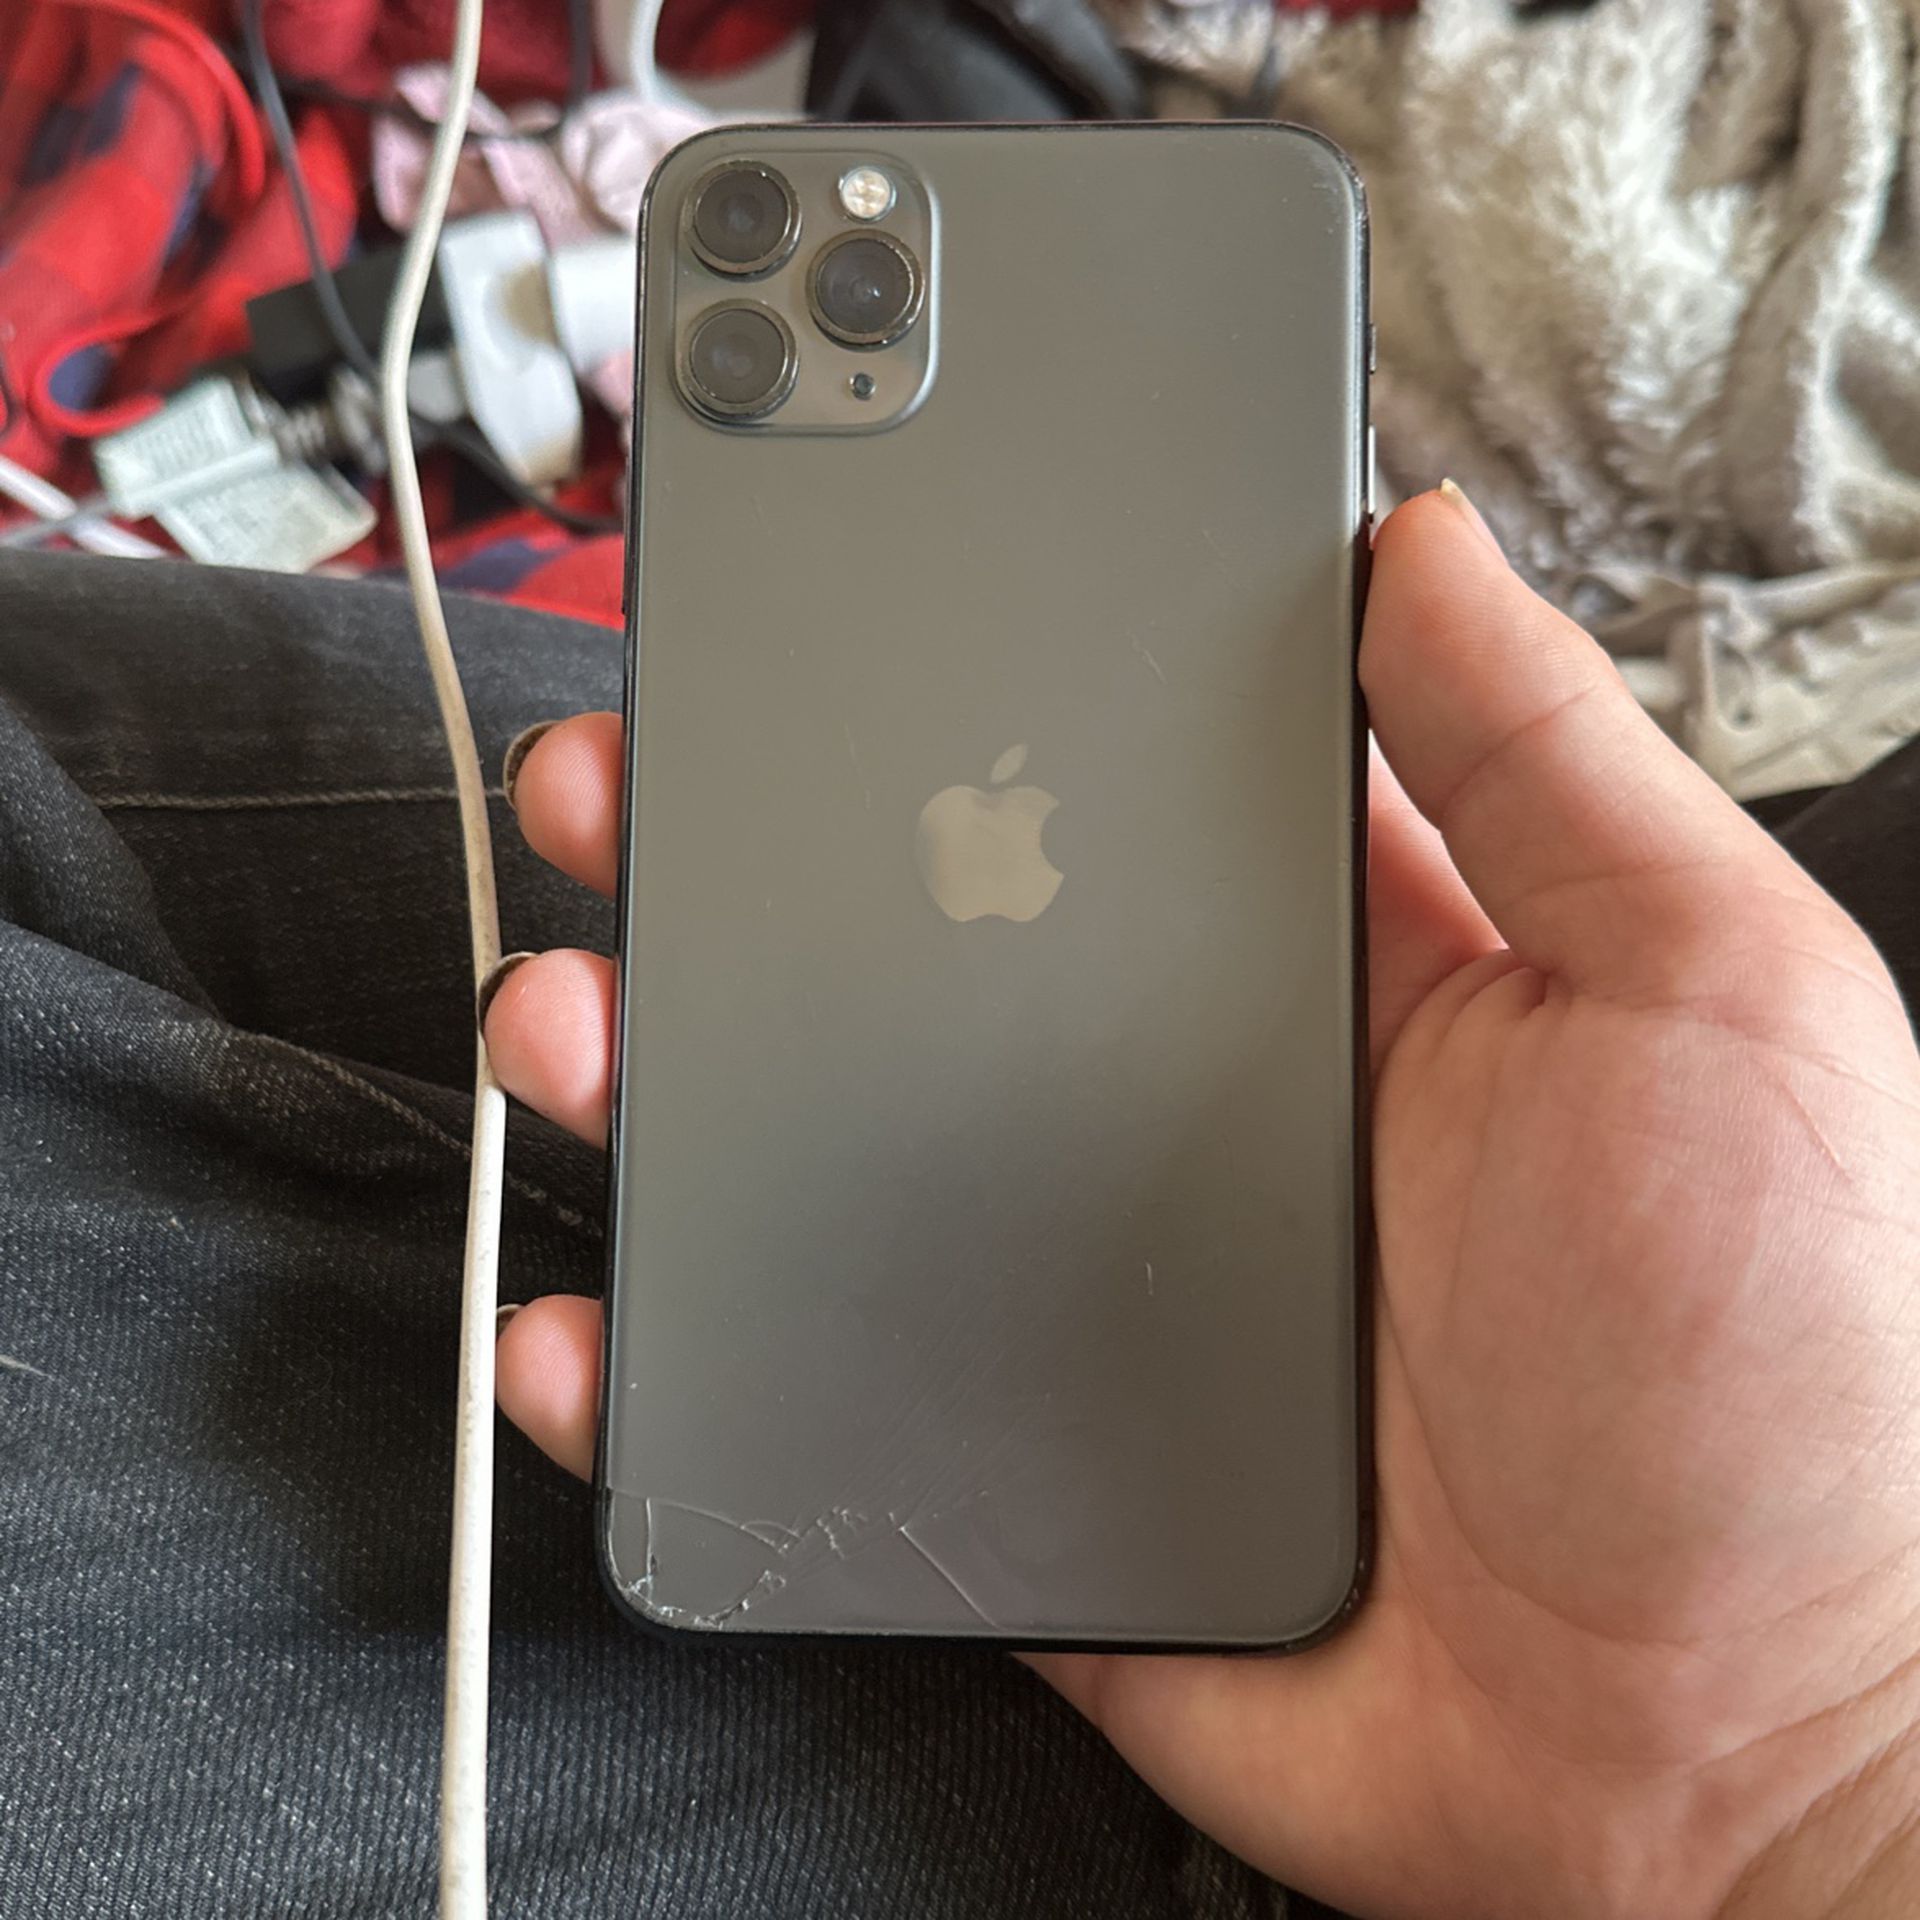 iPhone 11 Pro Max 256gb Space Grey